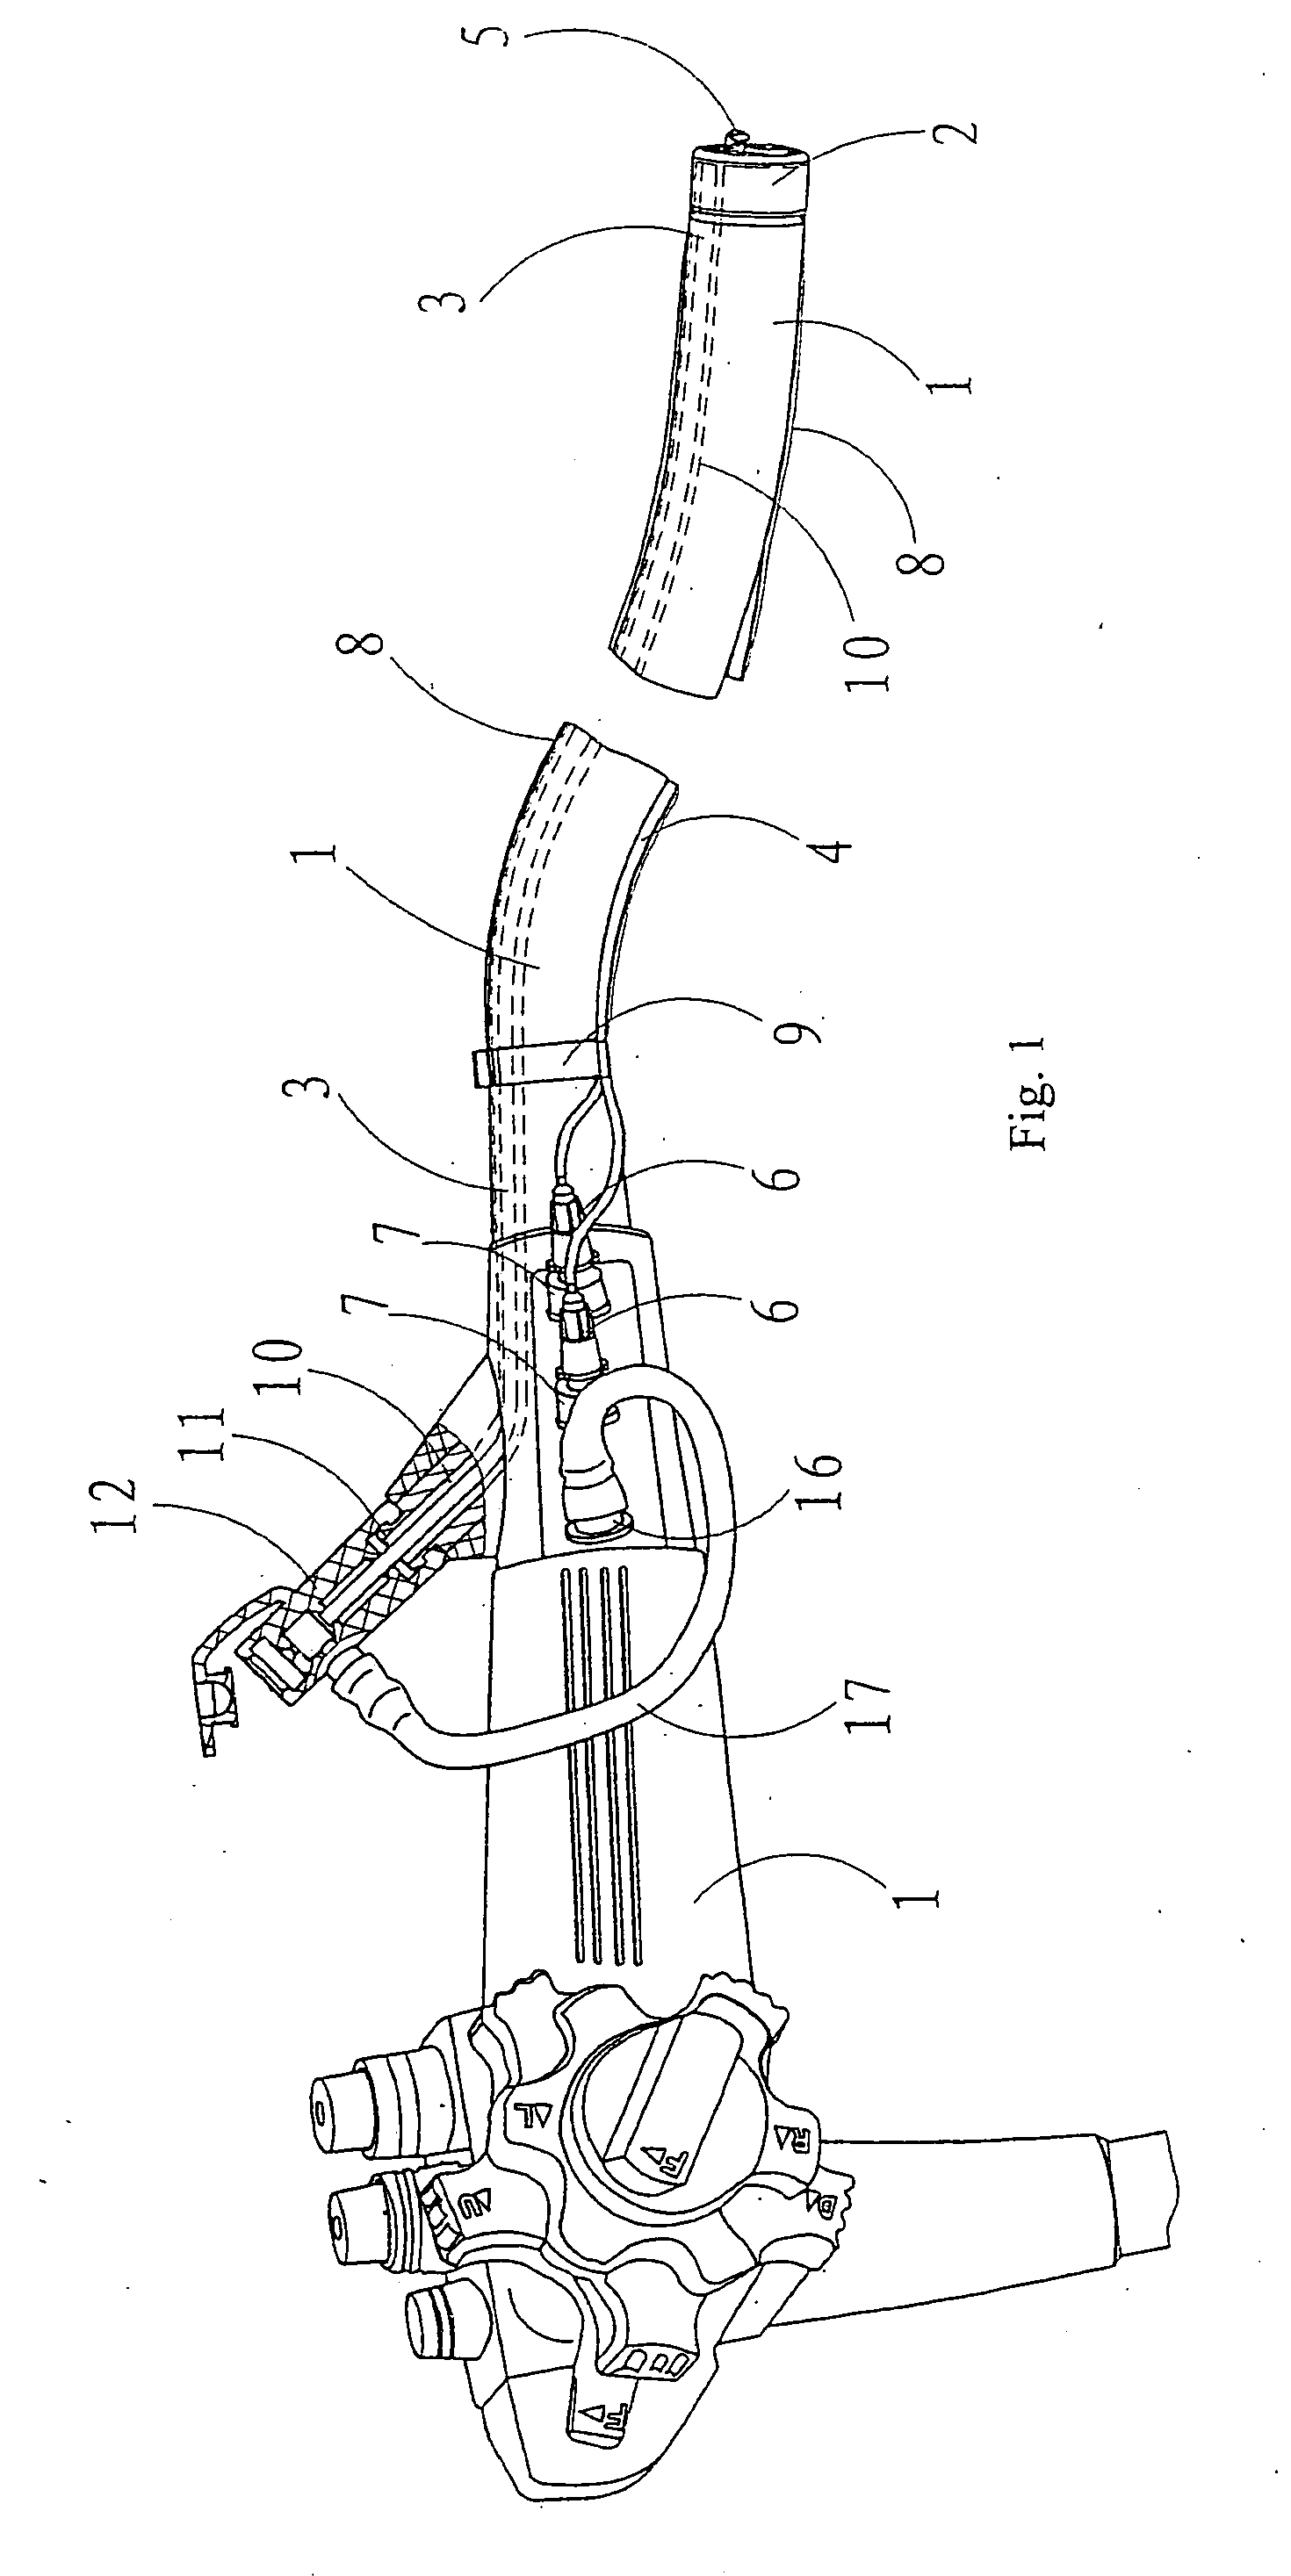 Endoscope System with a Disposal Sheath